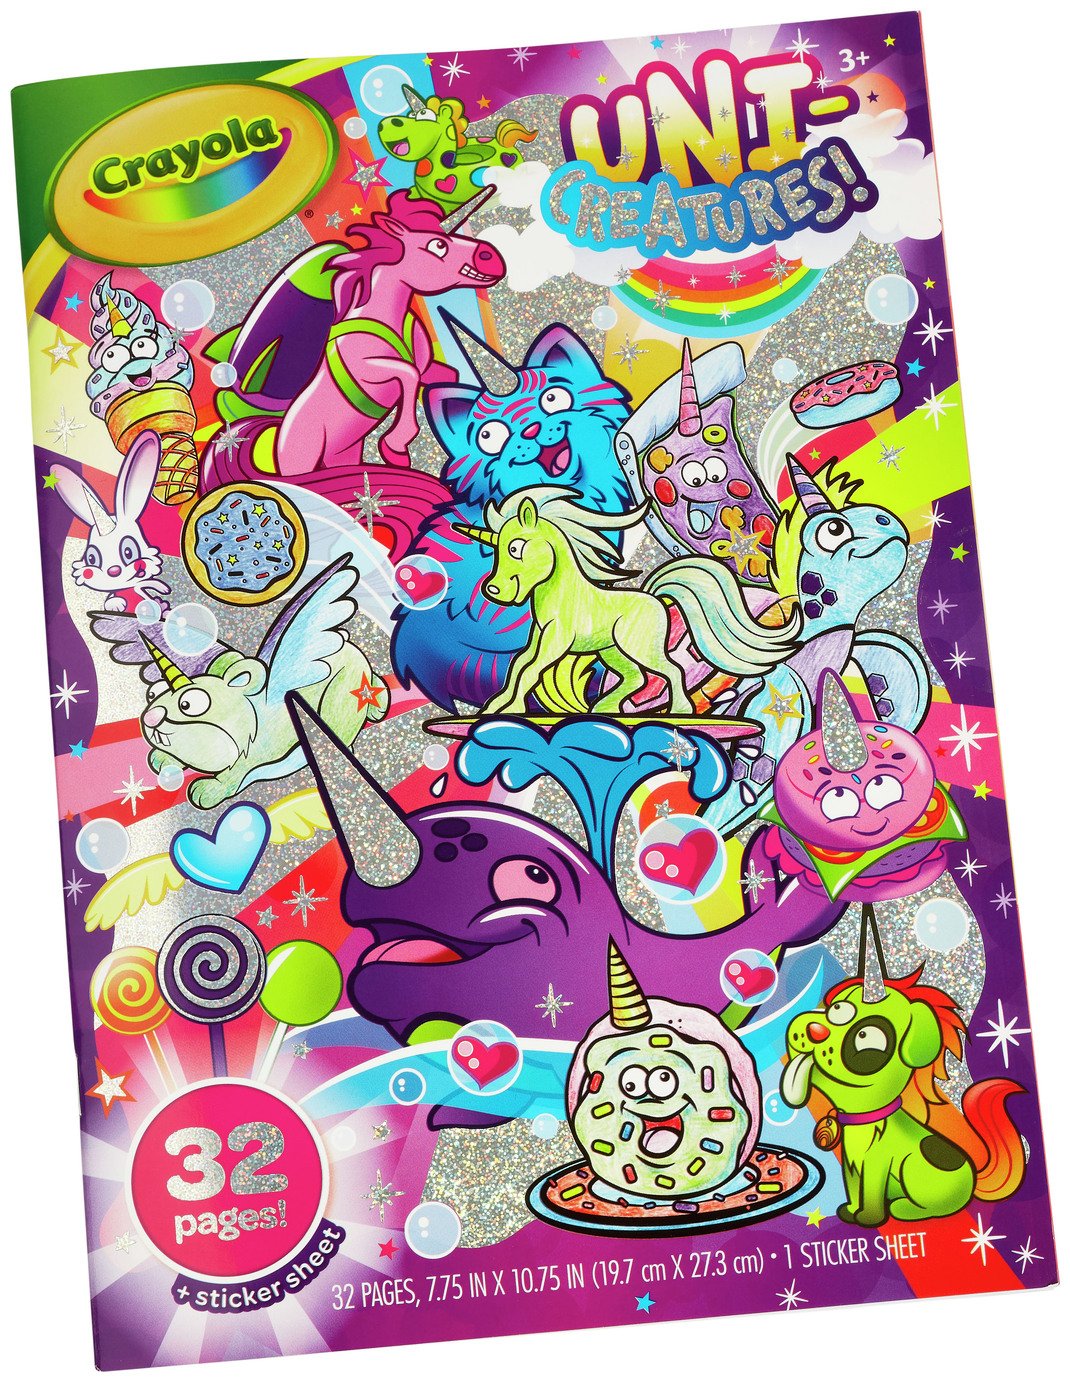 Crayola Unicreatures Colouring Pack